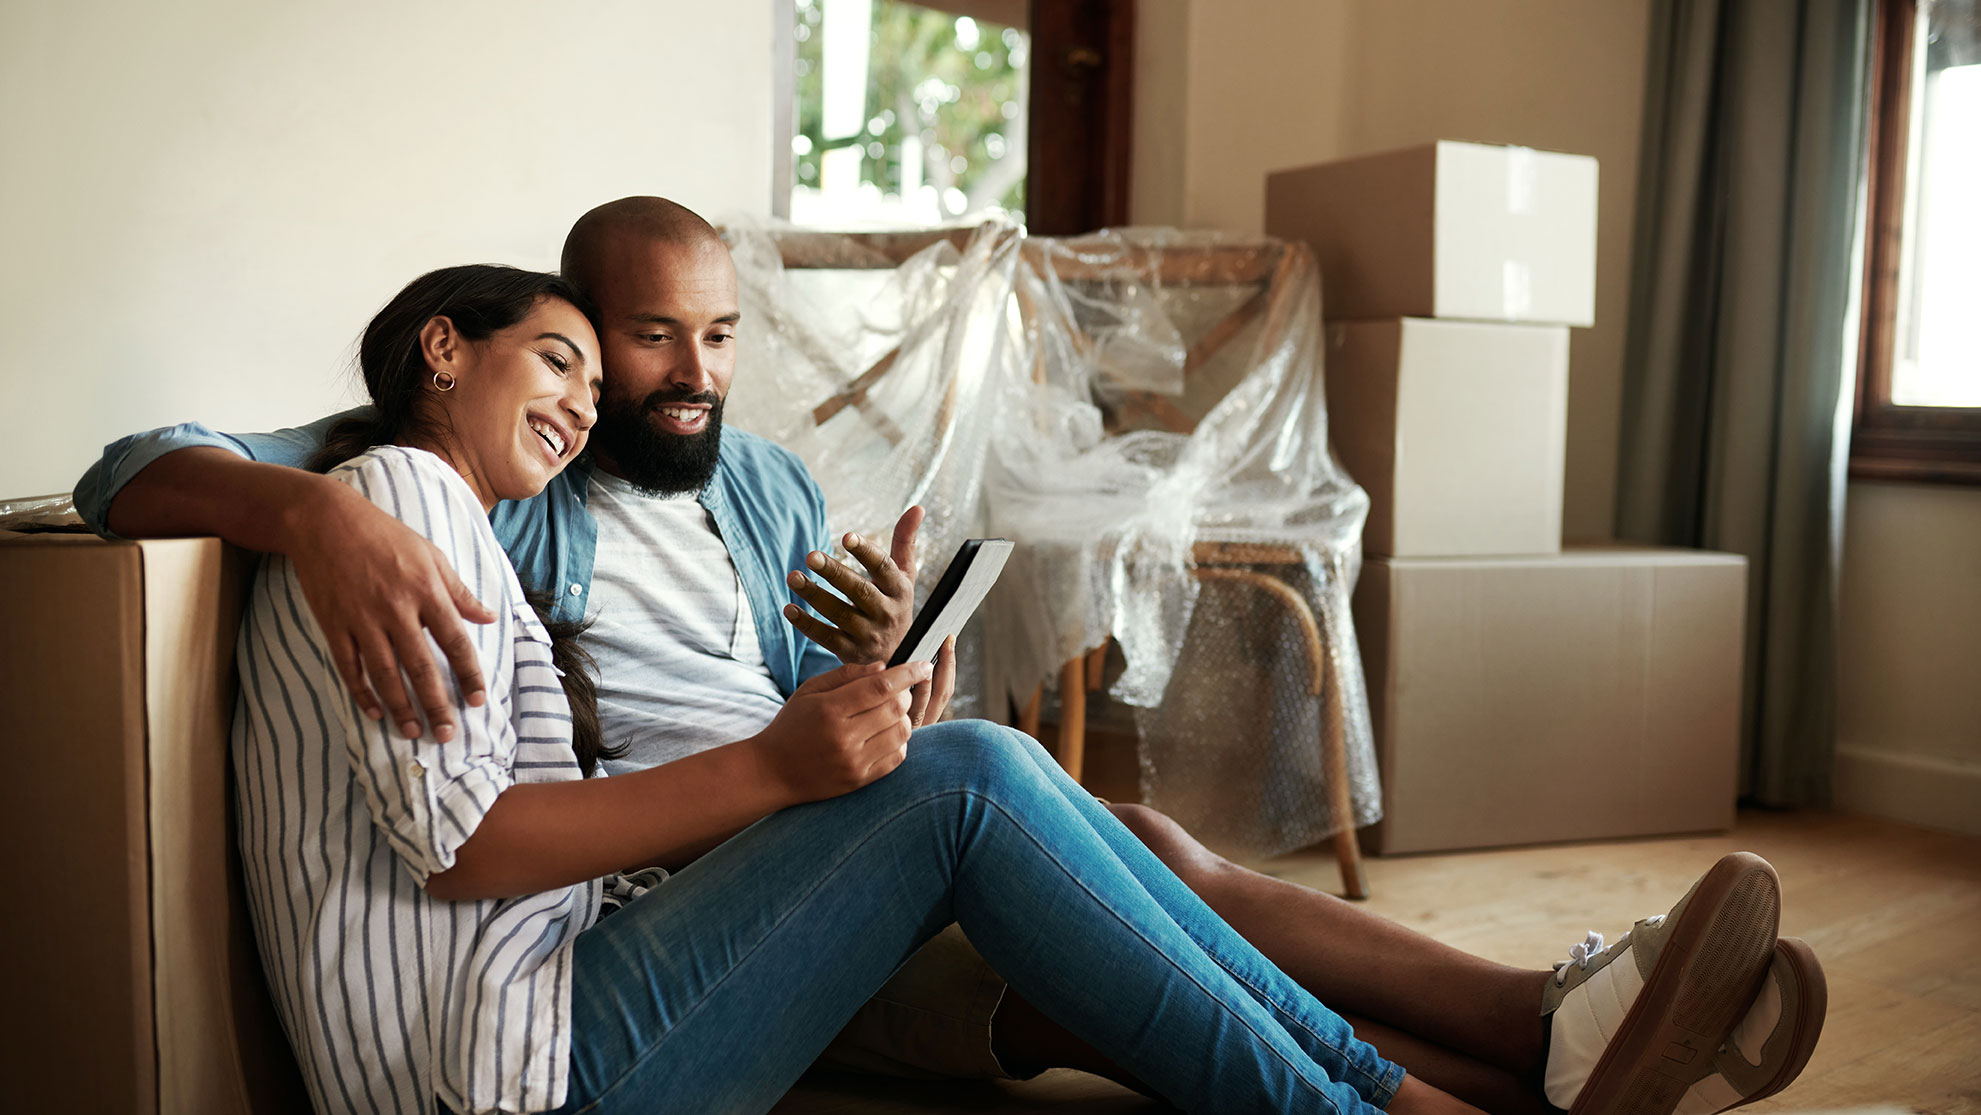 Applying for a new mortgage? We have tips to save you time.